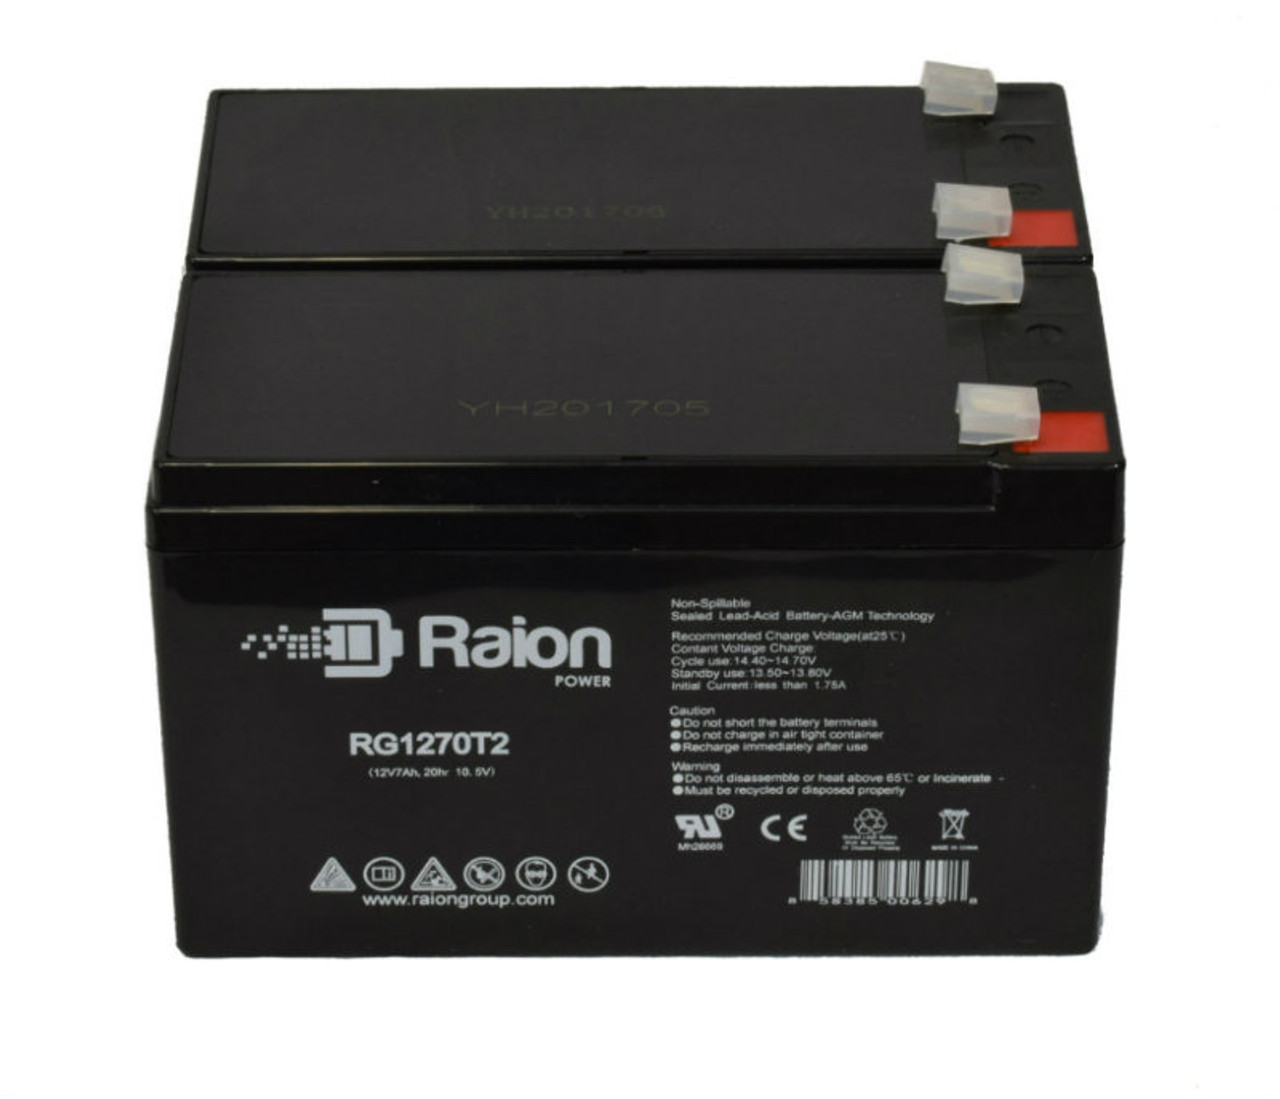 Raion Power Replacement 12V 7Ah Battery for NERBO NB 7-12 - 2 Pack